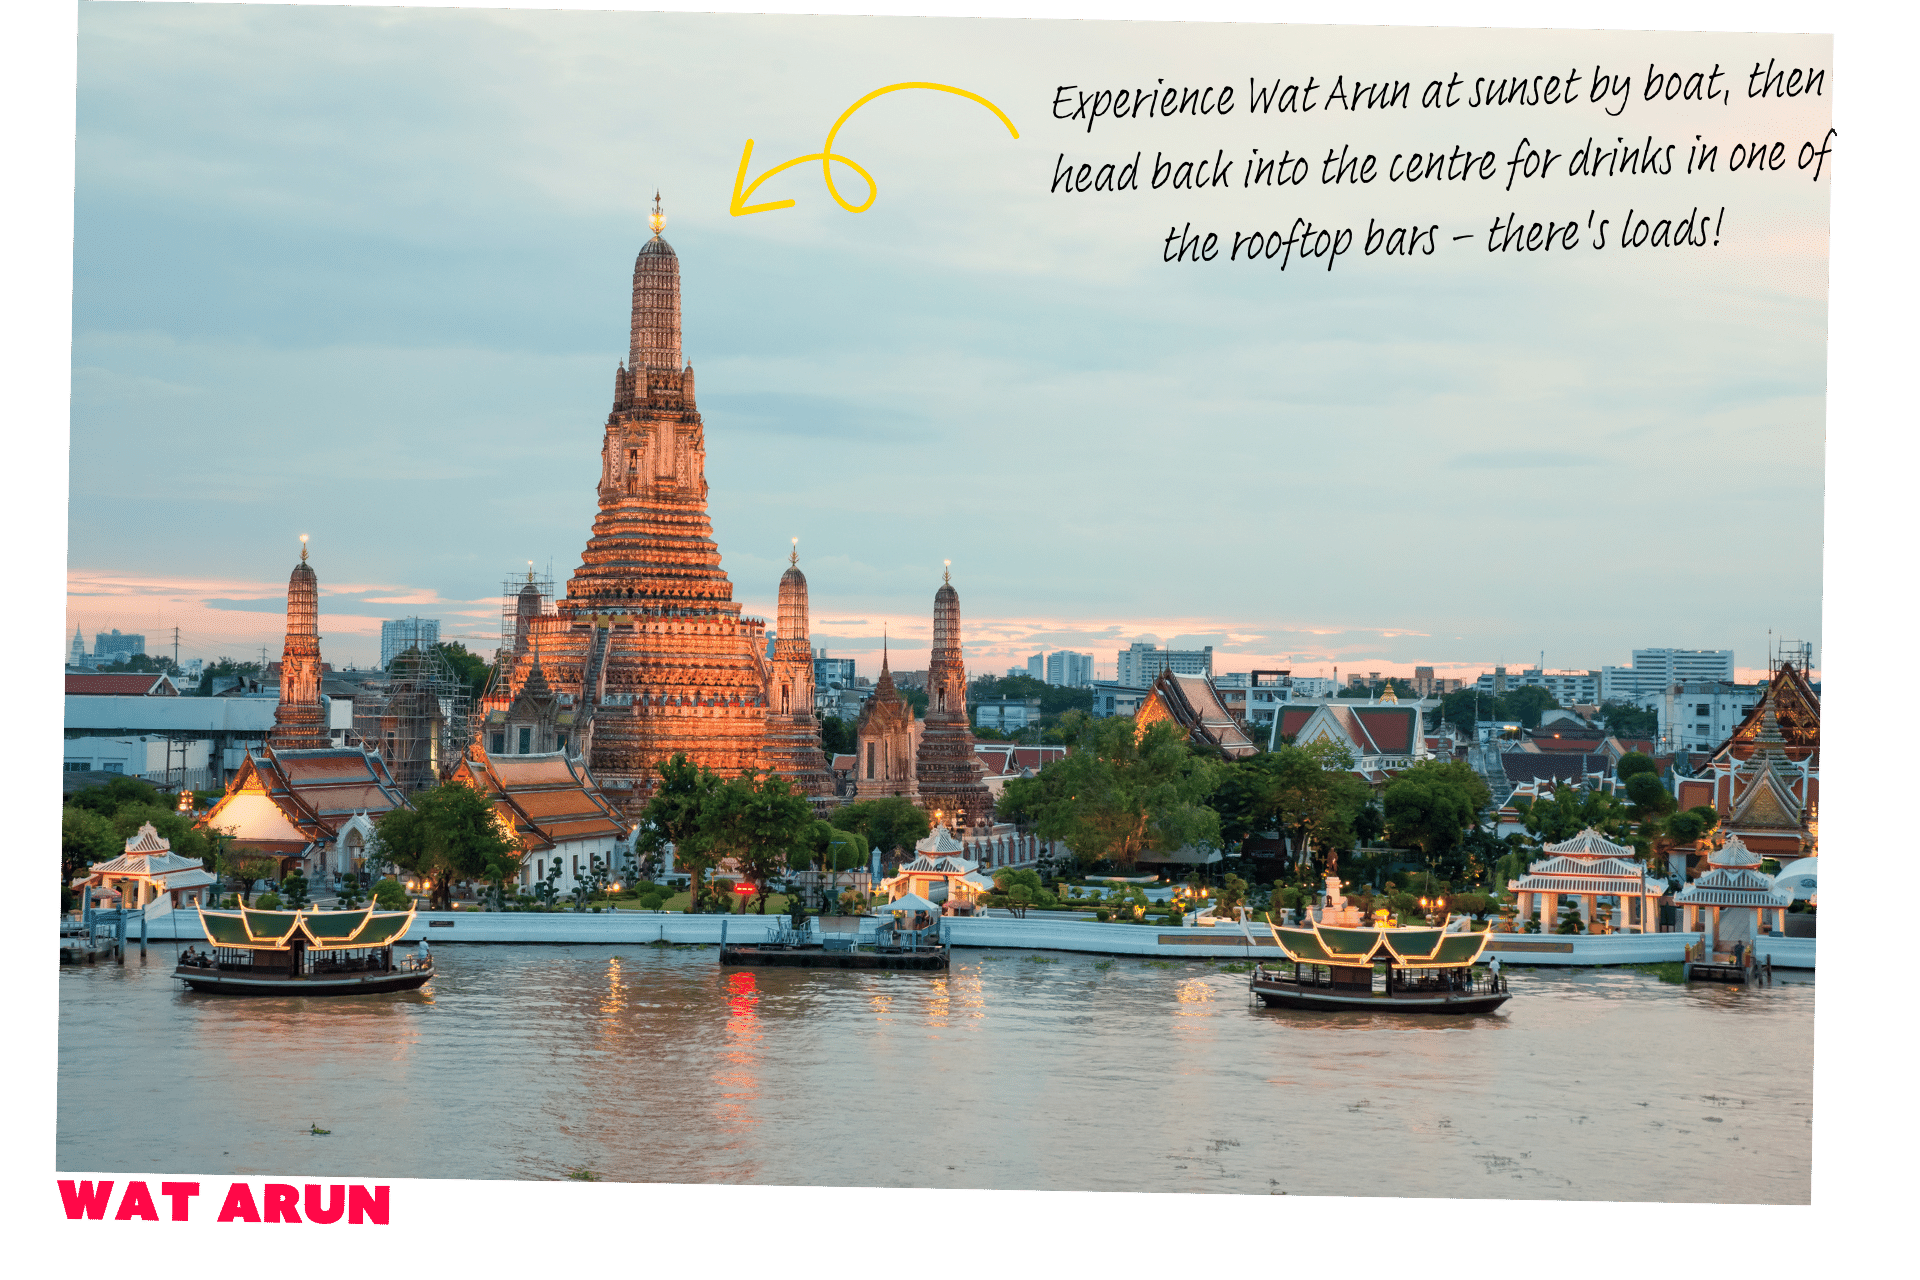 The Wat Arun temple on the banks of the Chao Phraya river in Bangkok - one of the best stopover cities for flying to Asia.